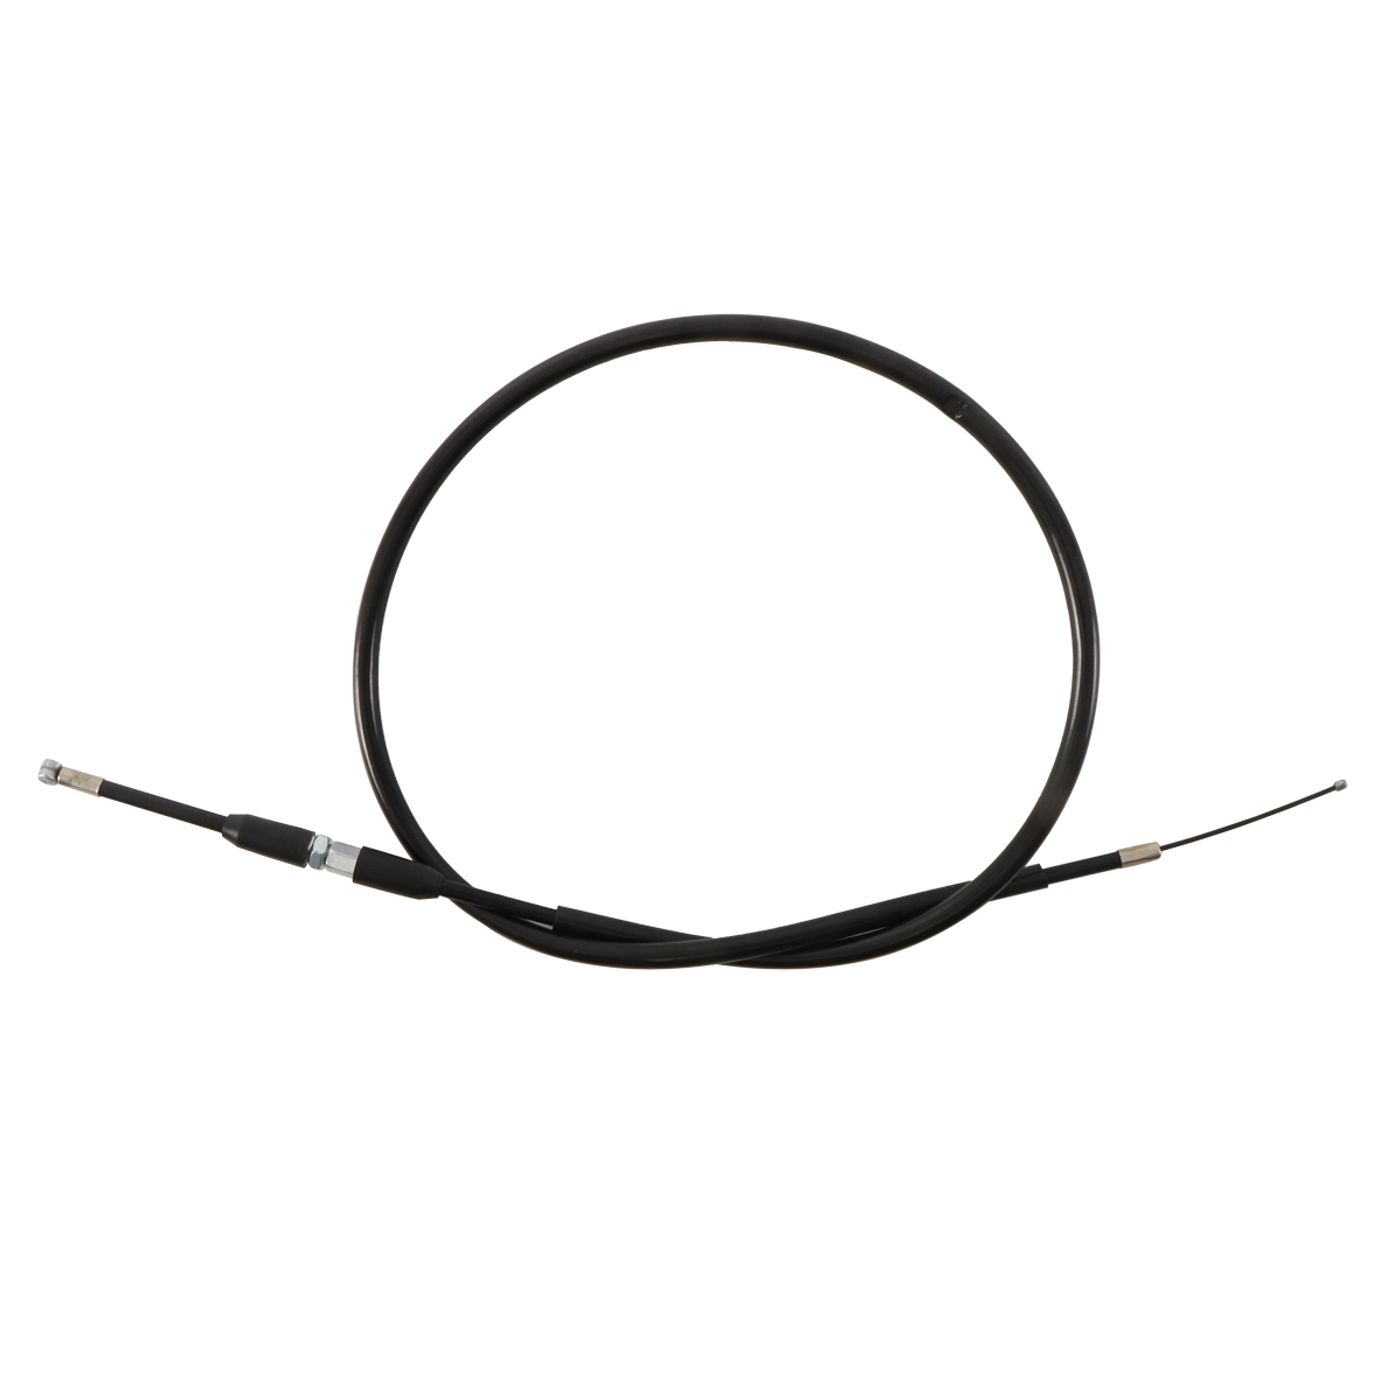 Wrp Clutch Cables - WRP453003 image